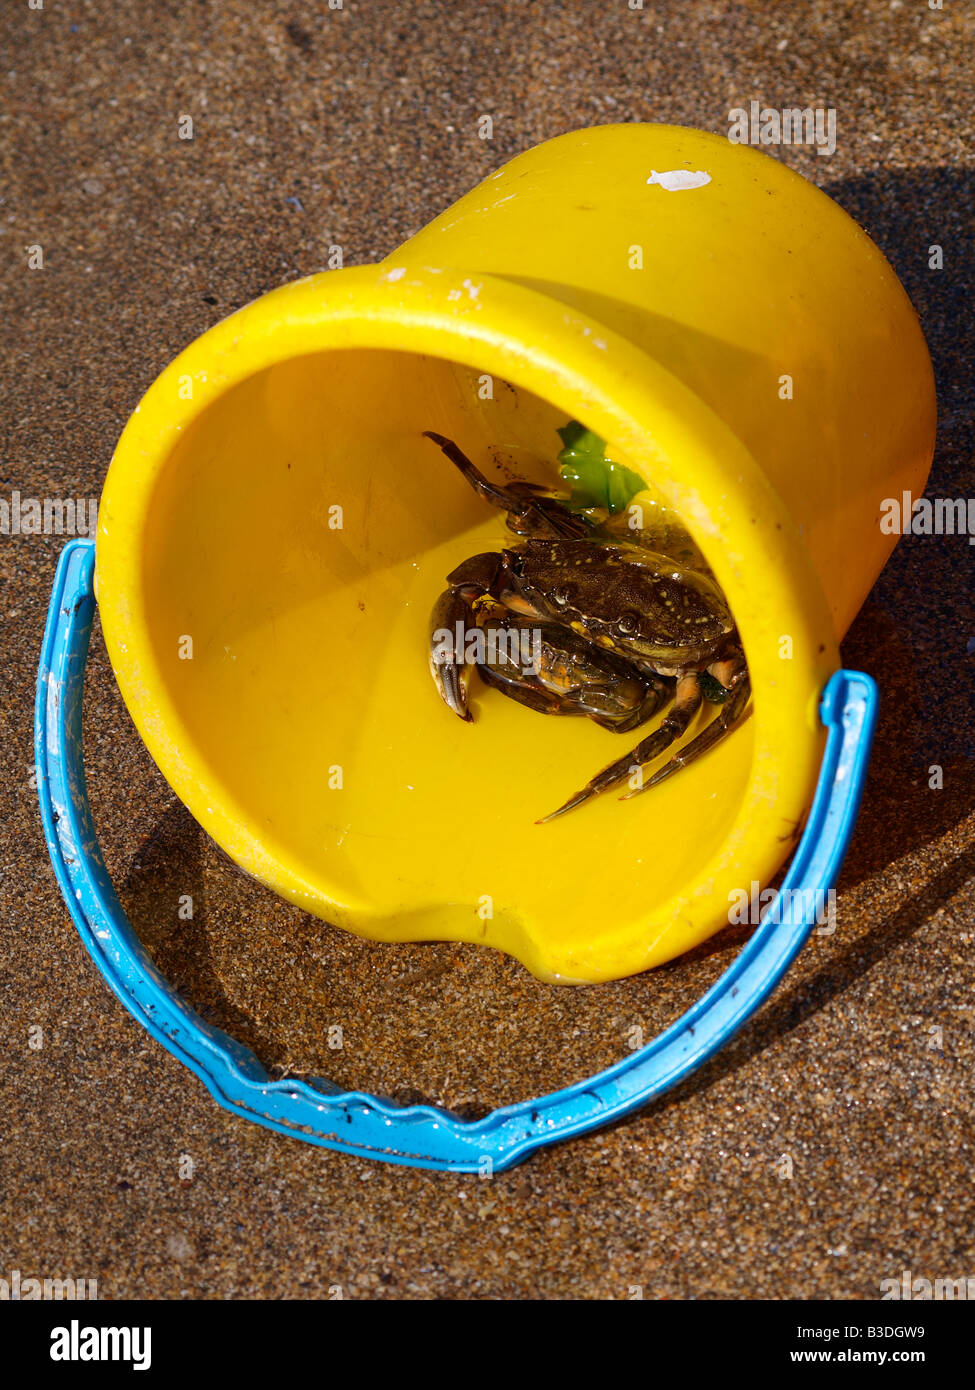 Two Shore crabs, Carcinus maenas, in a yellow bucket on a sandy beach. Stock Photo